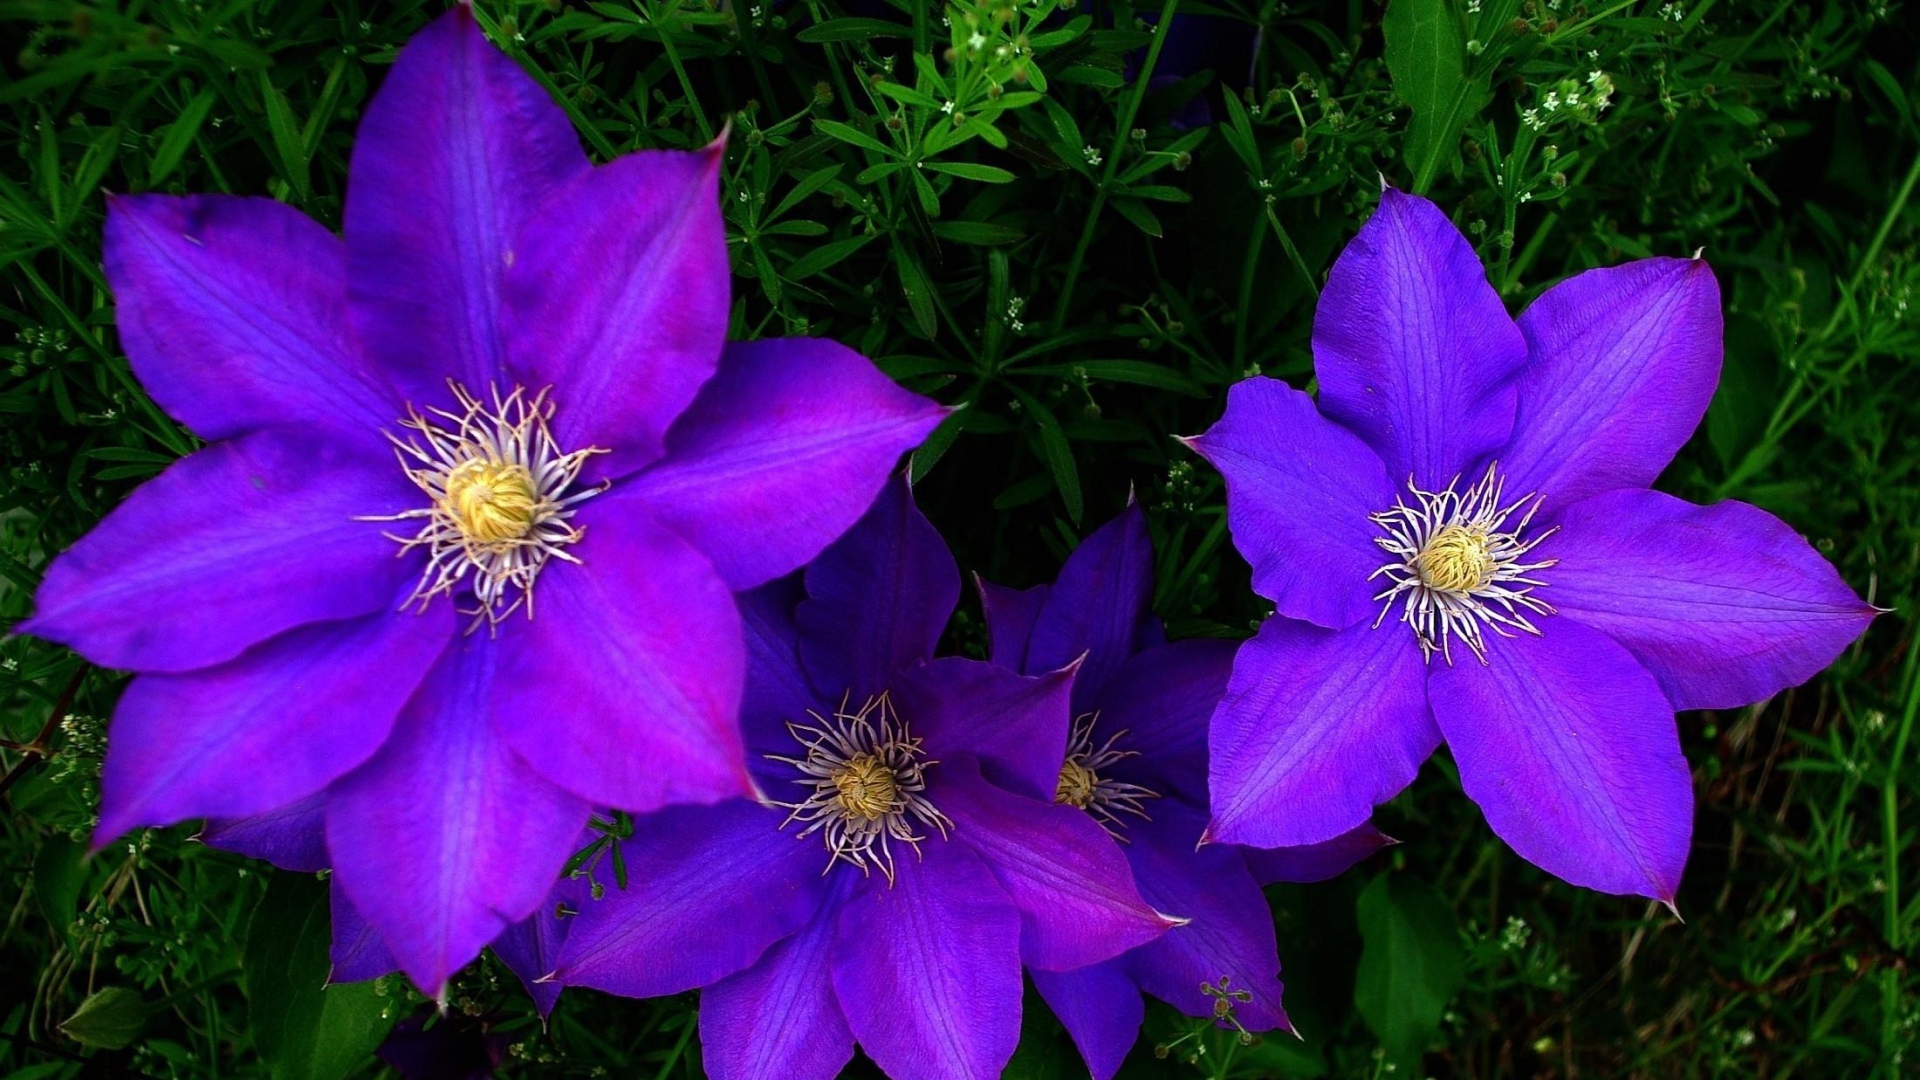 Clematis Flowers Bright Purple Green Images Download